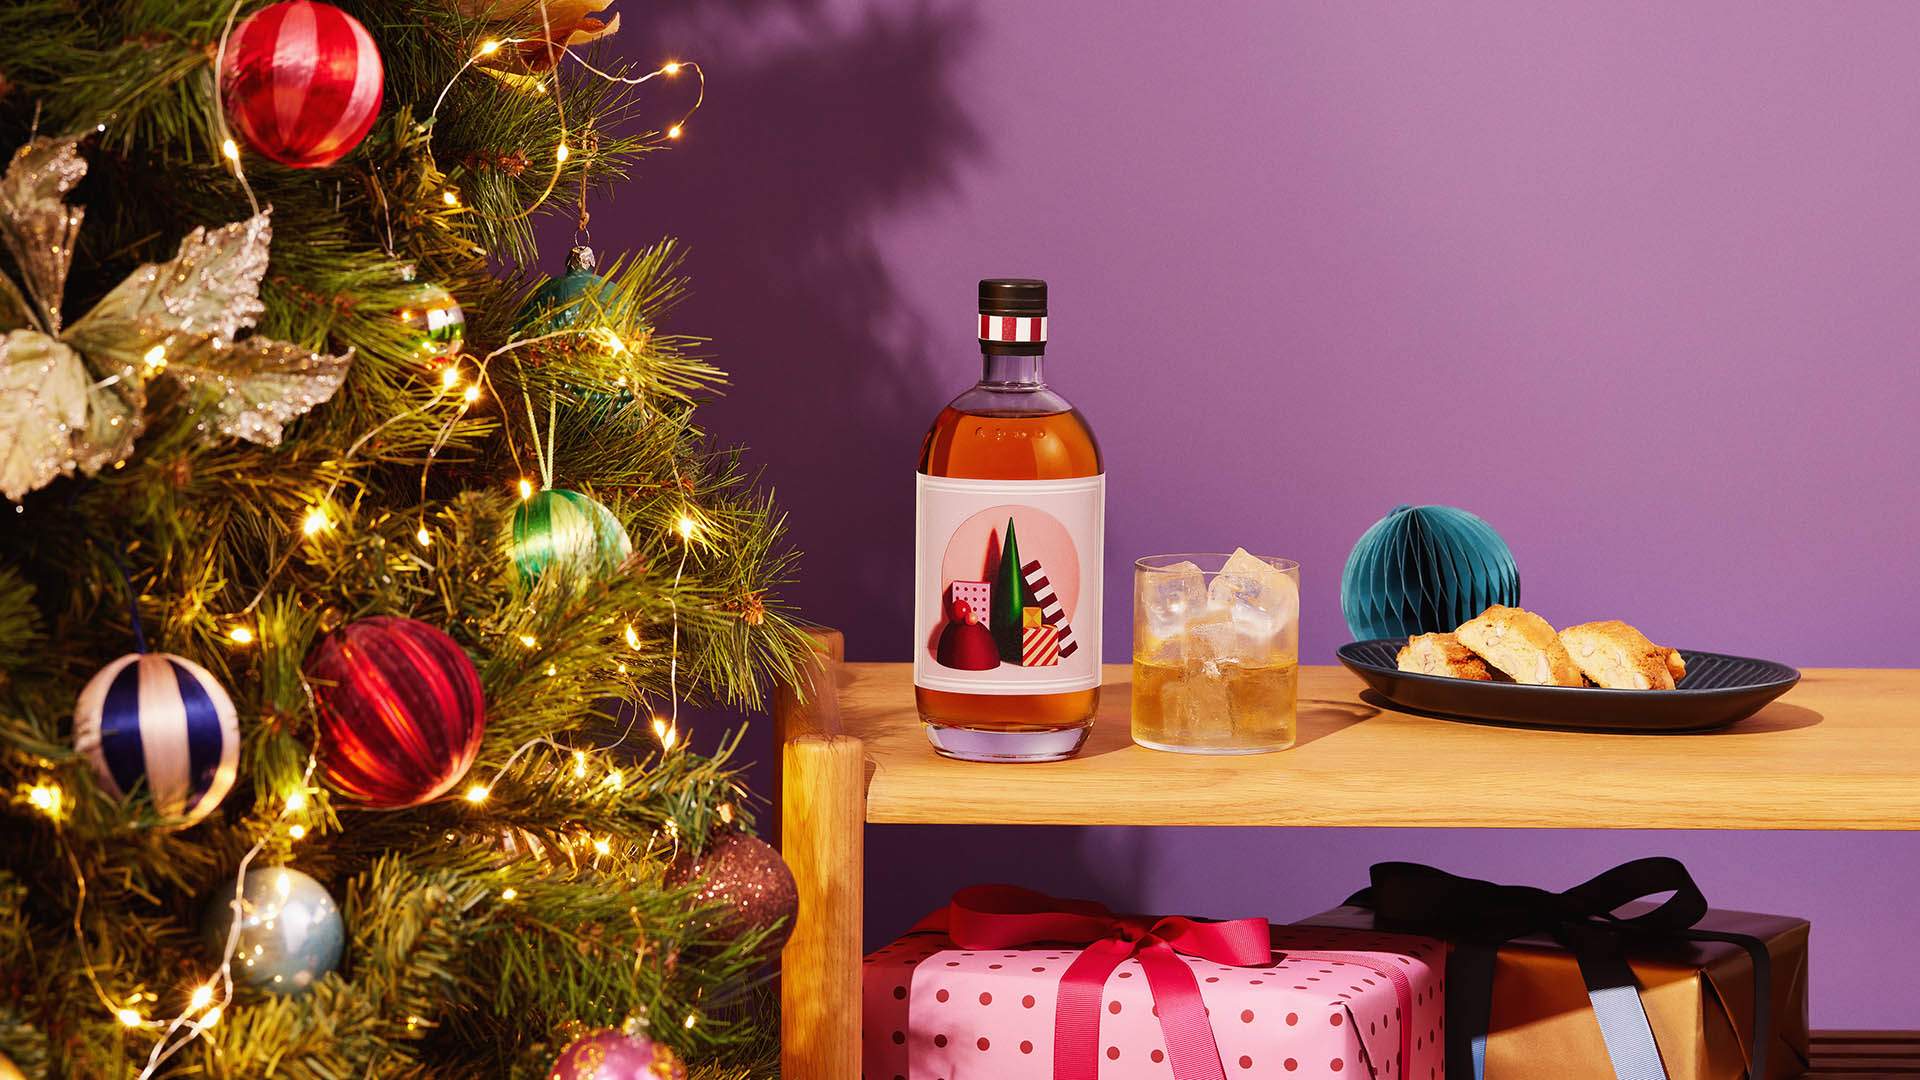 Four Pillars' 2022 Christmas Gin Is On Its Way So You Can Get Drunk on Pud with Nan